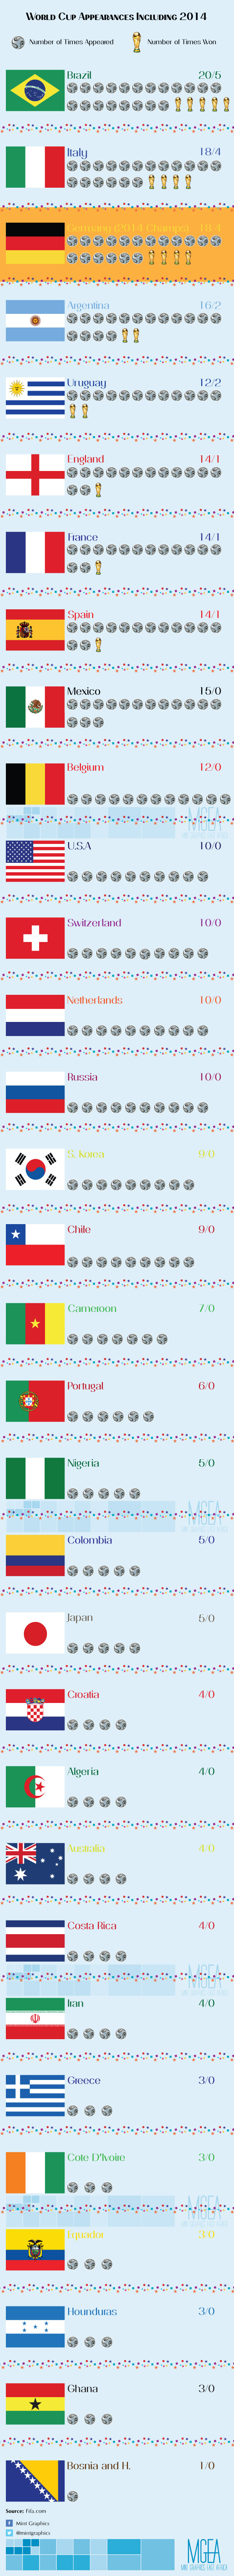 World Cup 2014 Infographic